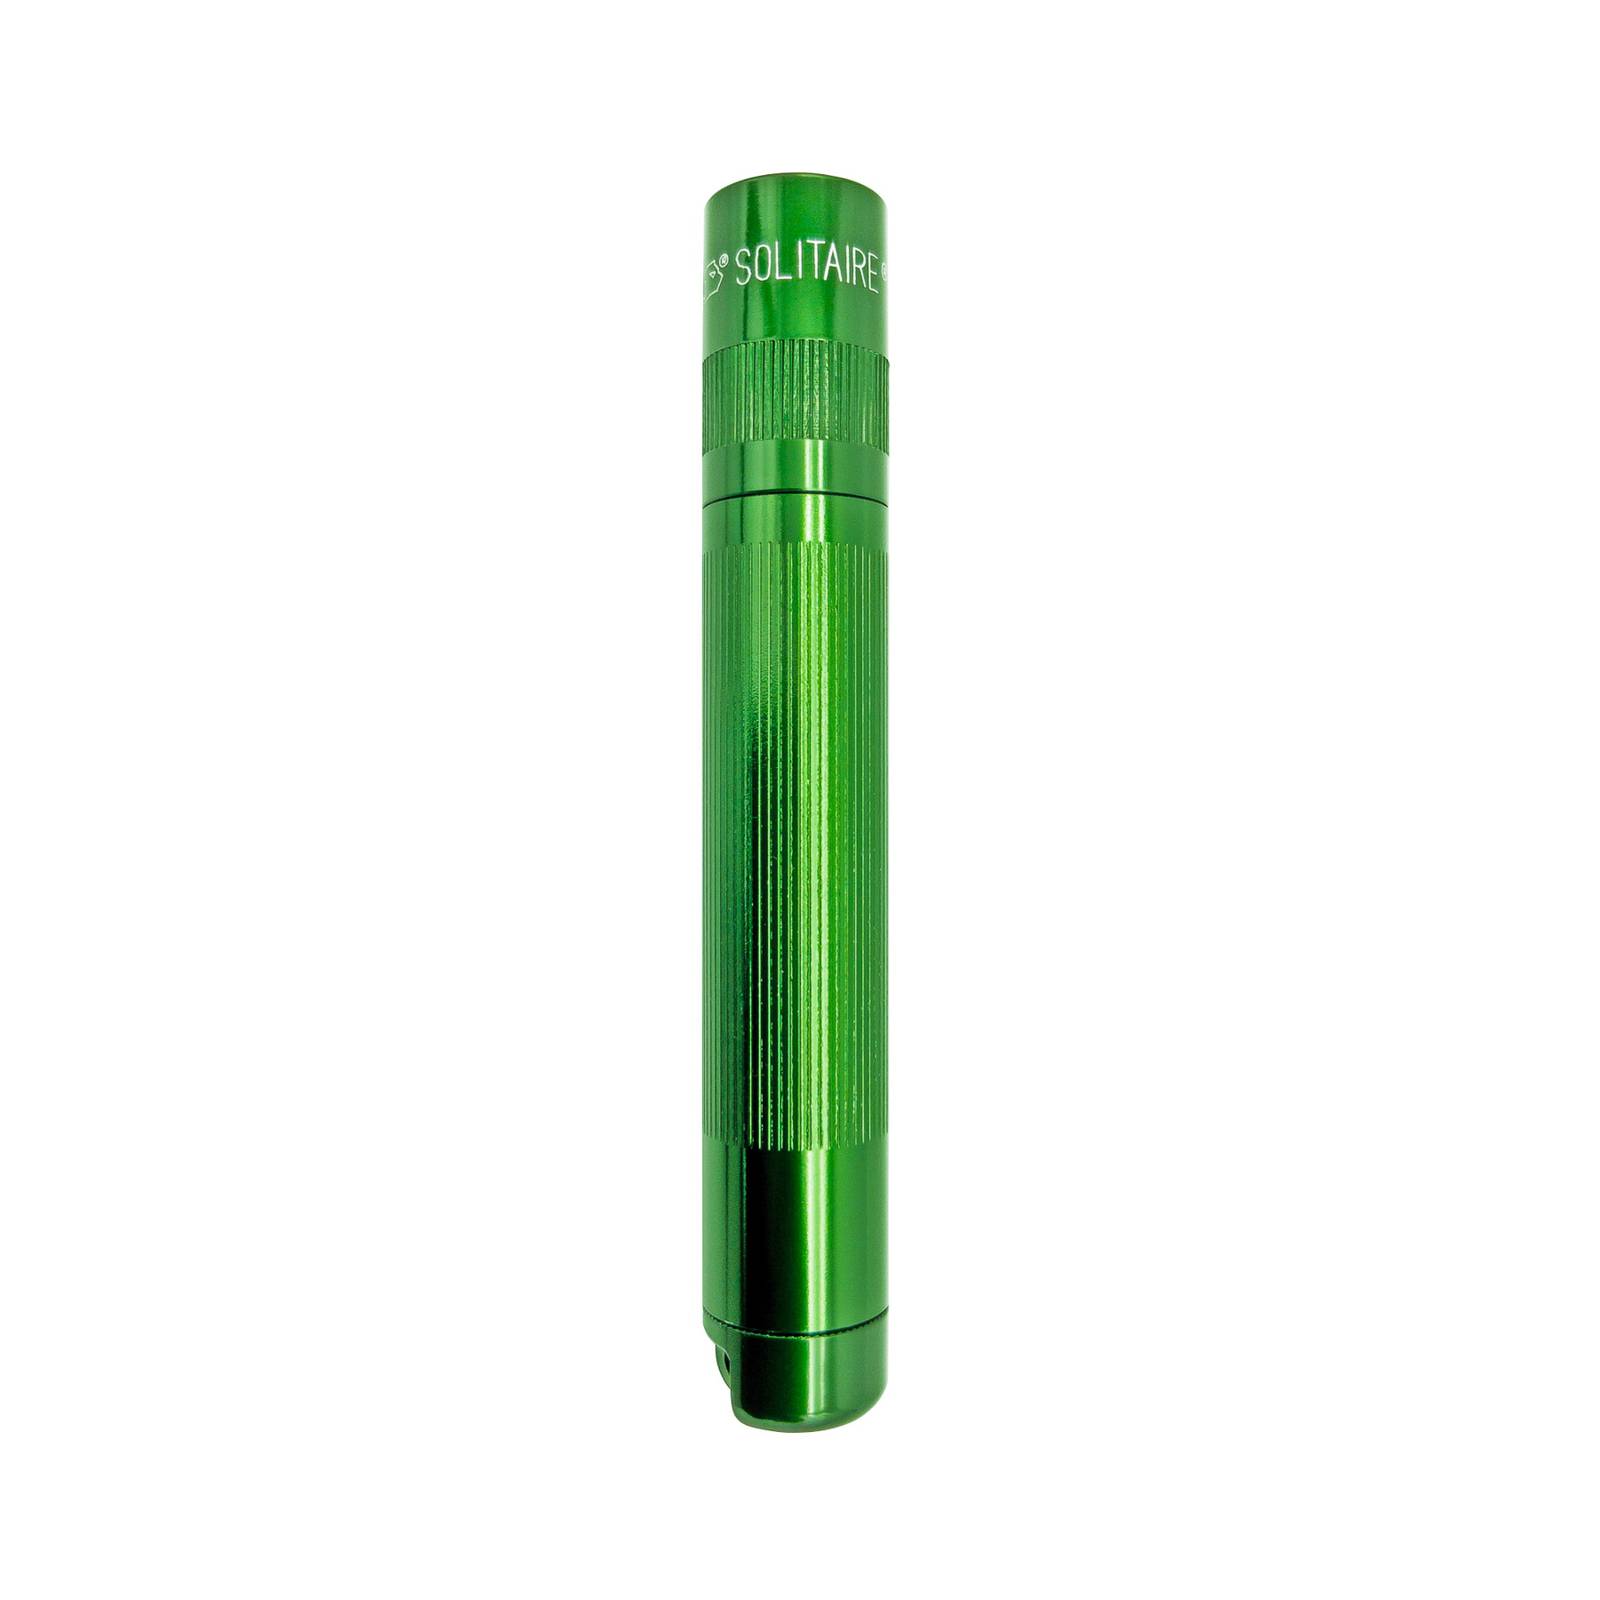 maglite lampe de poche led solitaire, 1-cell aaa, vert